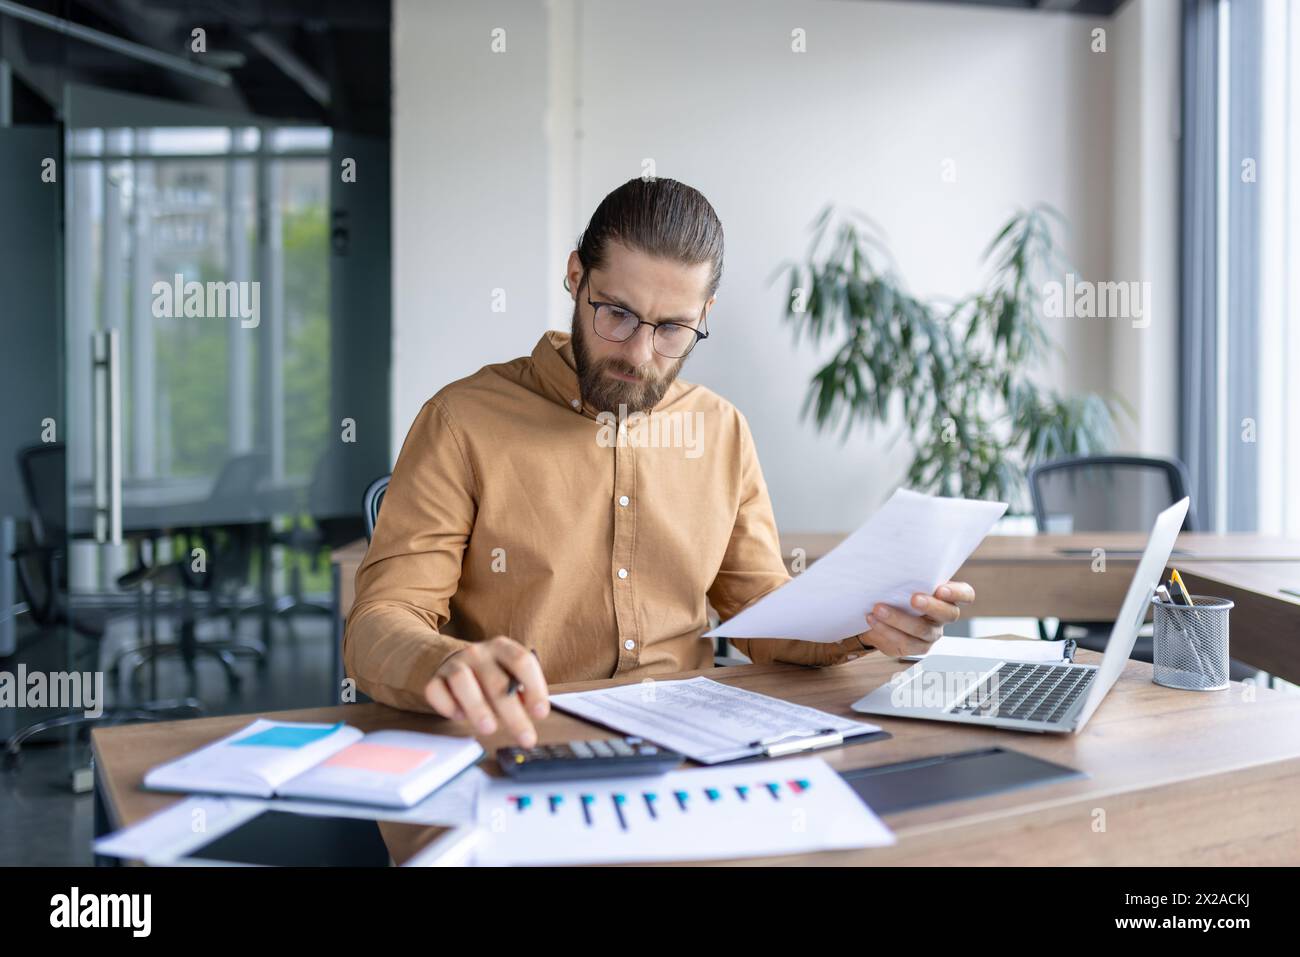 A focused young male professional examines paperwork while working in a contemporary office setting with a laptop and charts on his desk. Stock Photo